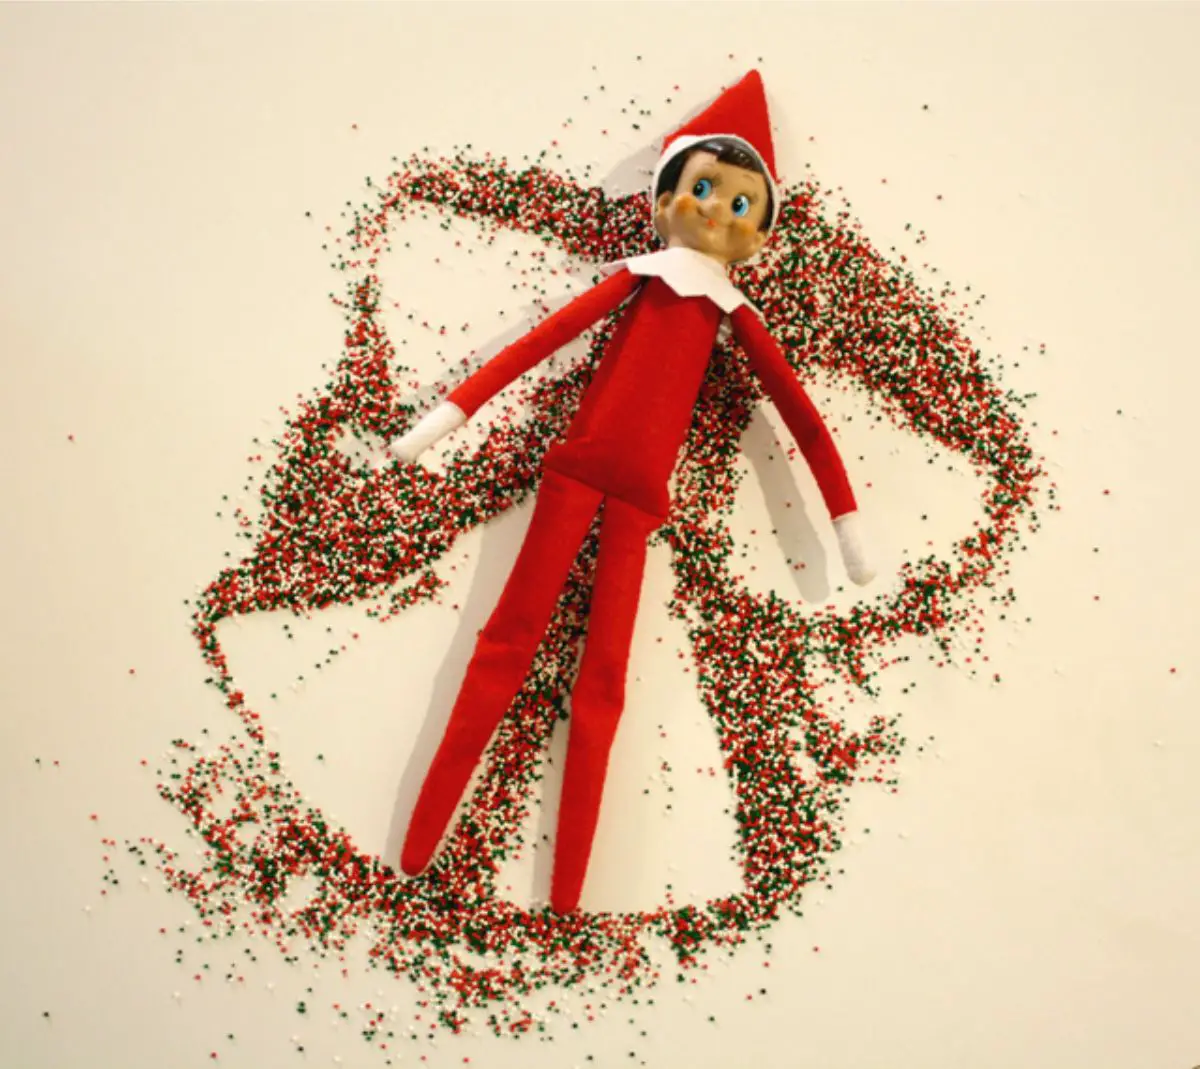 elf on the shelf making snow angel out of sprinkles